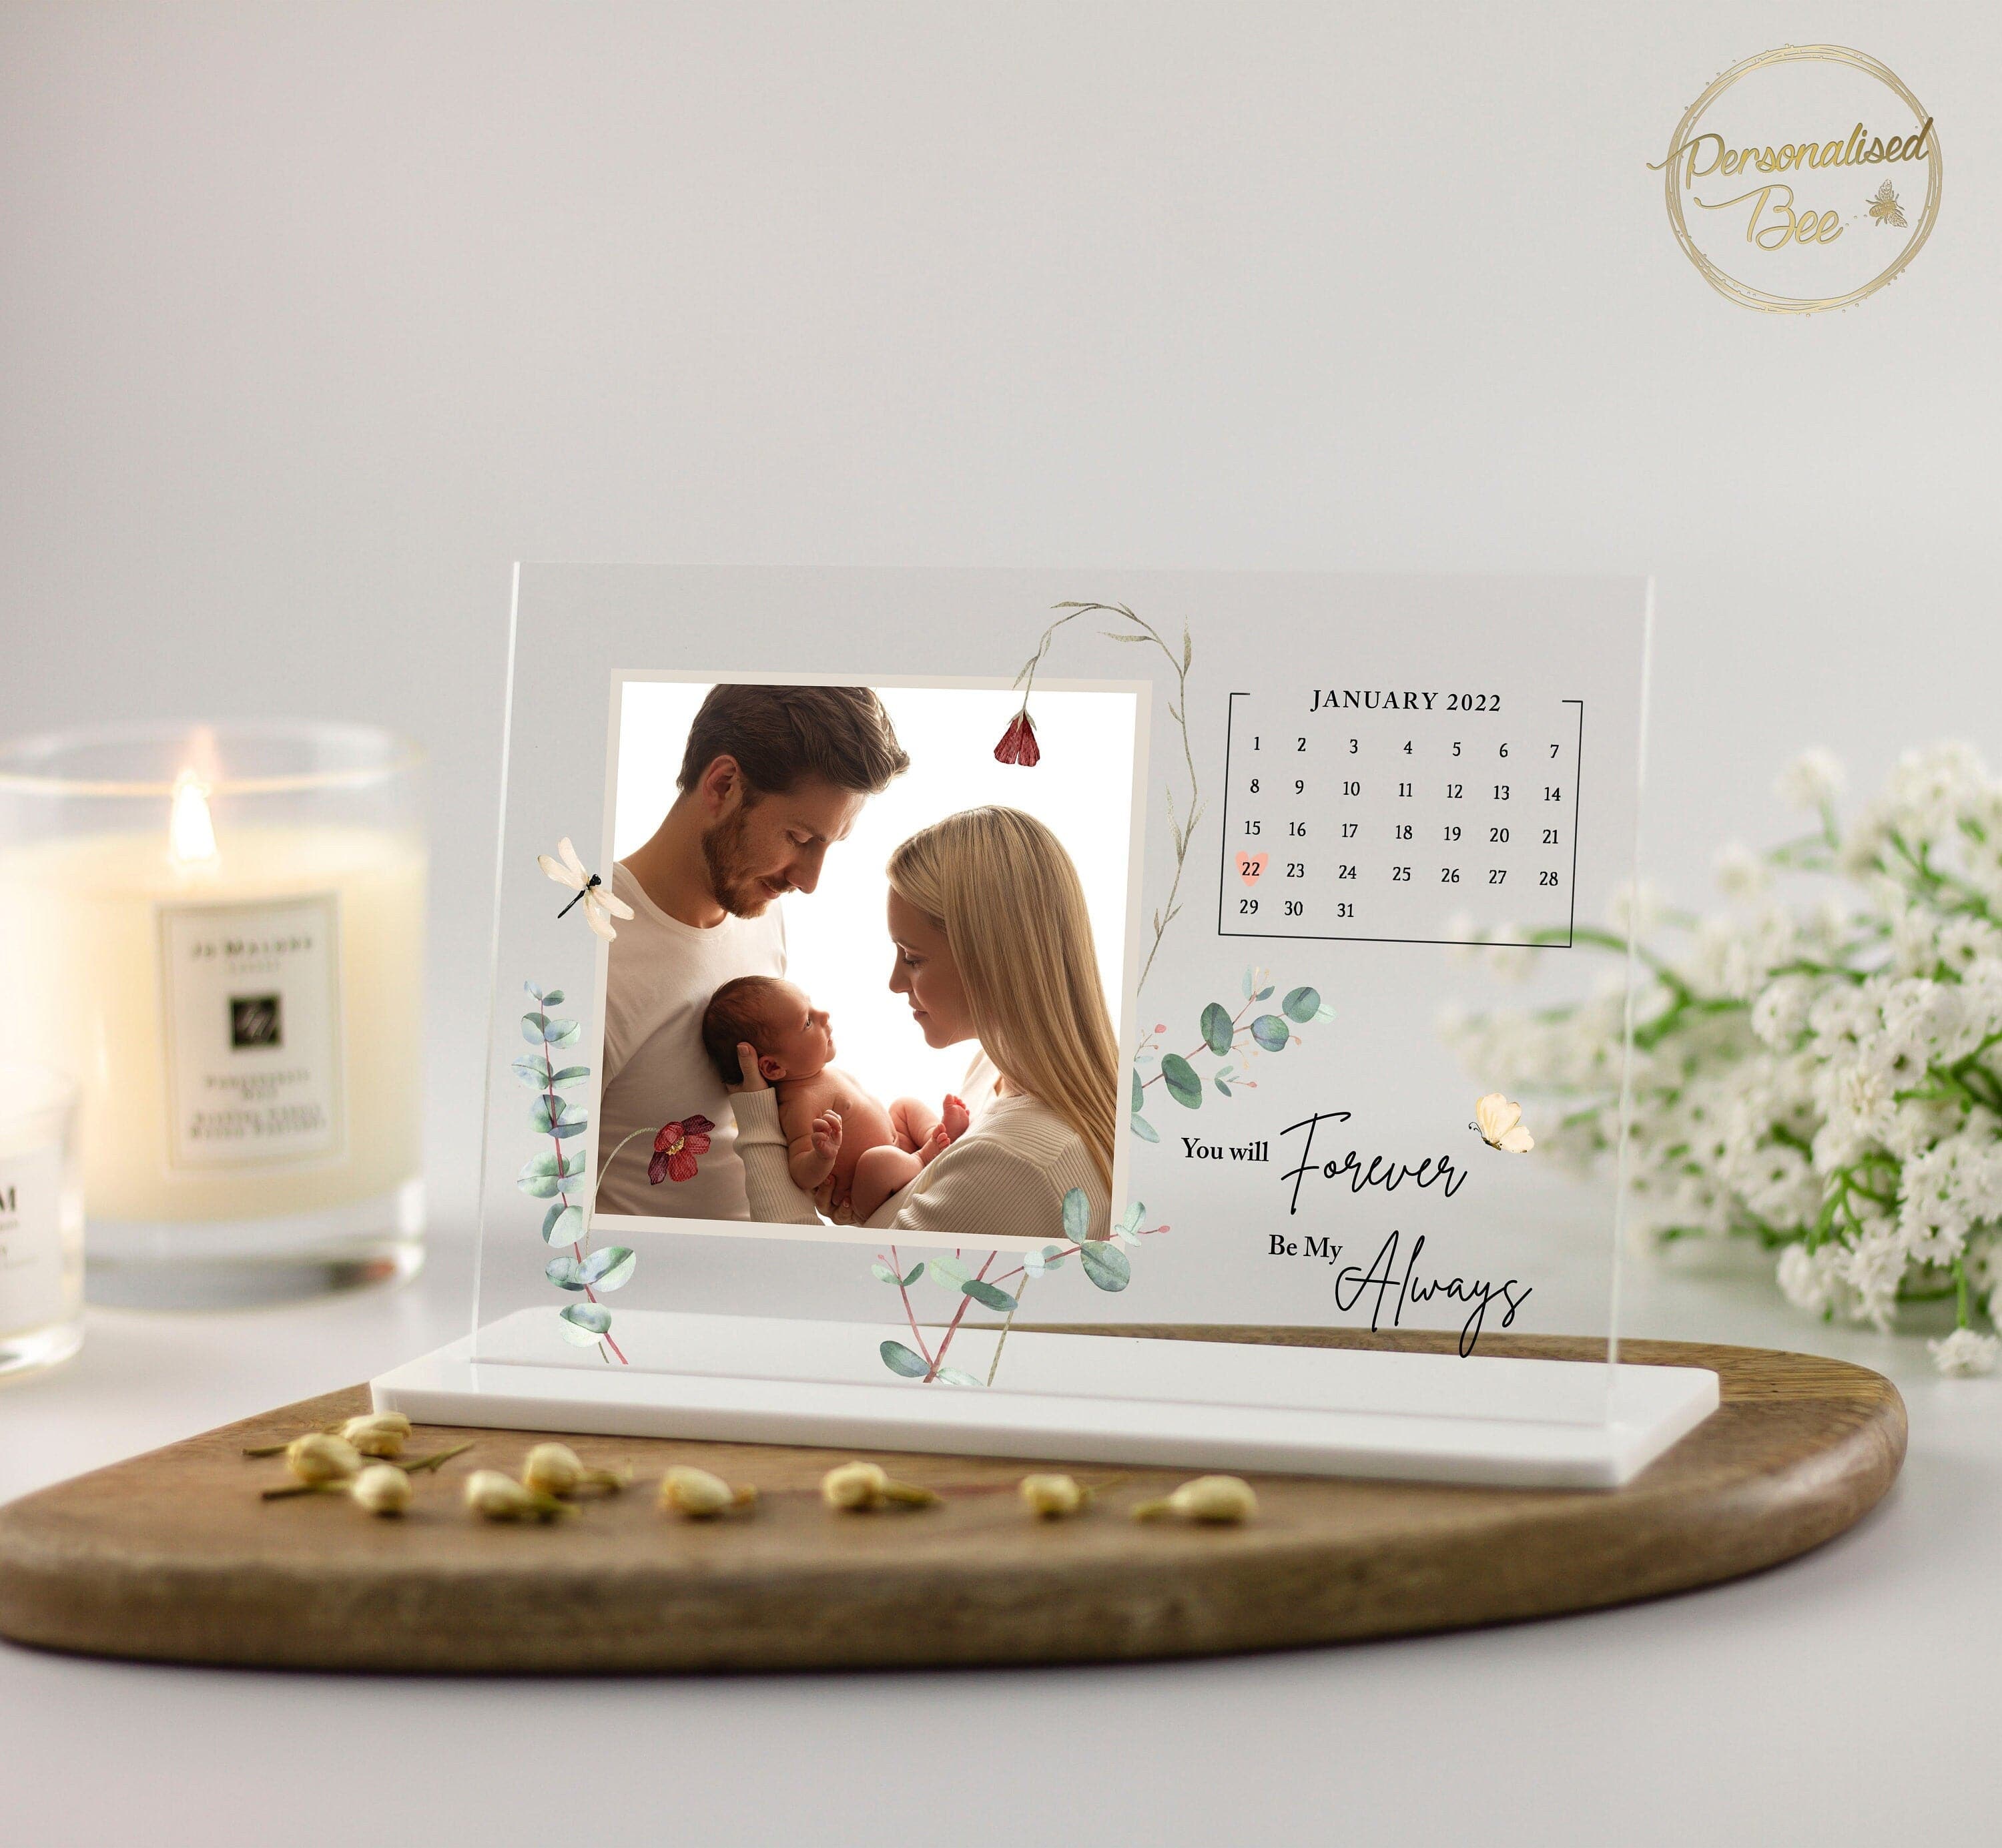 Personalised Couple Photo and Memorable Date Gift, Couples Gift, Anniversary Gift, Valentines Gift, Engagement Gifts, Gifts for Him/Her